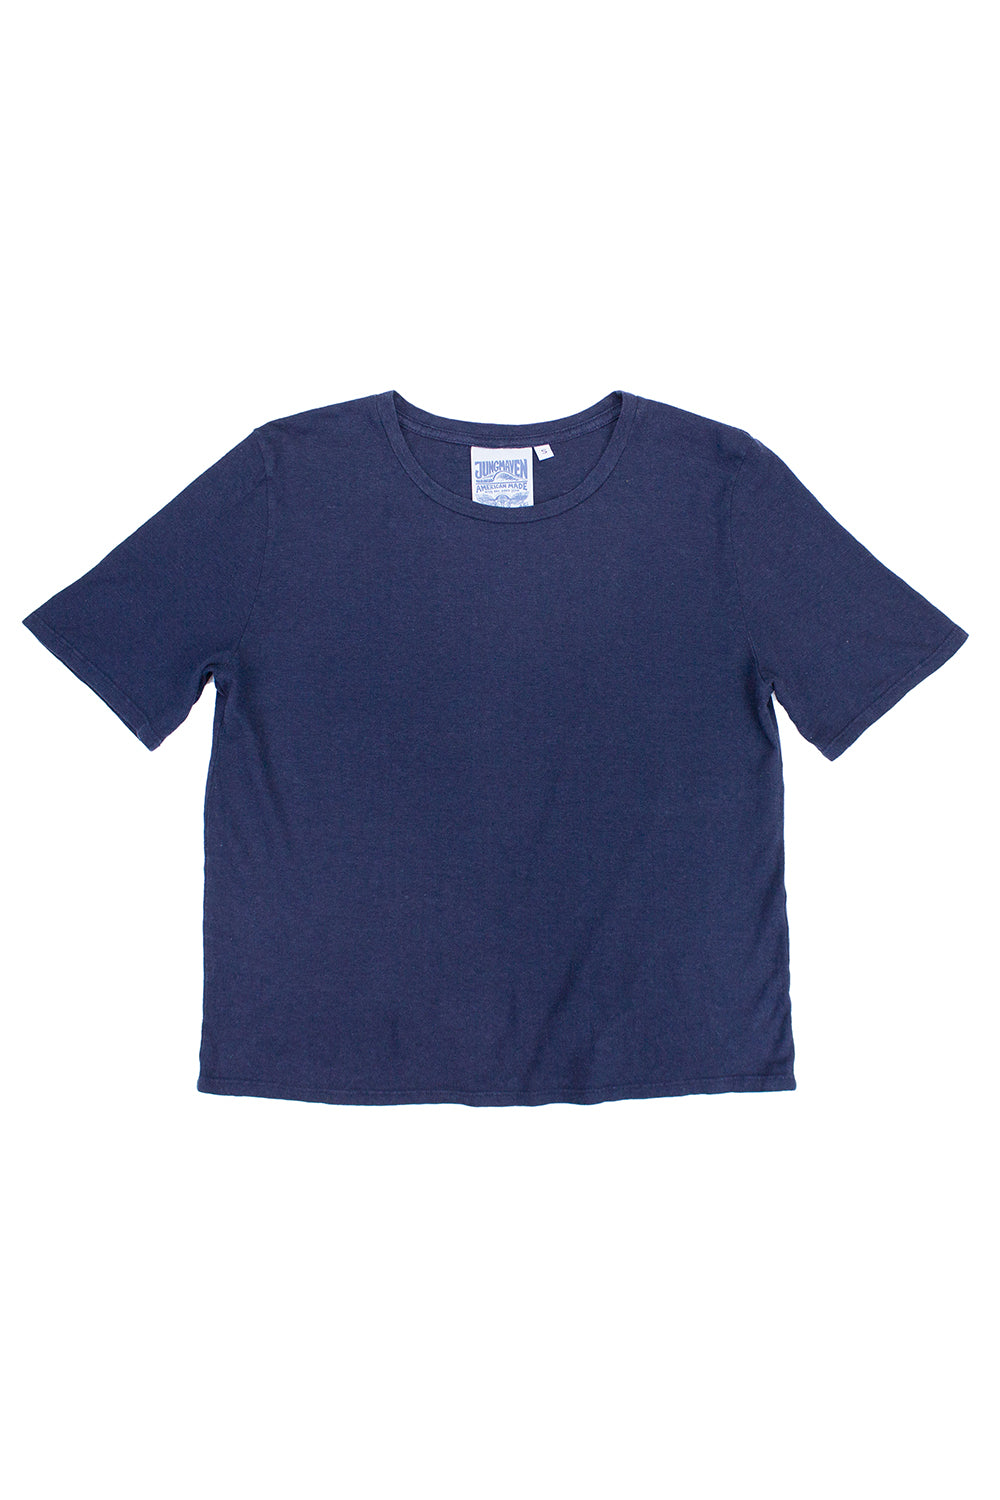 Silverlake Cropped Tee | Jungmaven Hemp Clothing & Accessories / Color: Navy